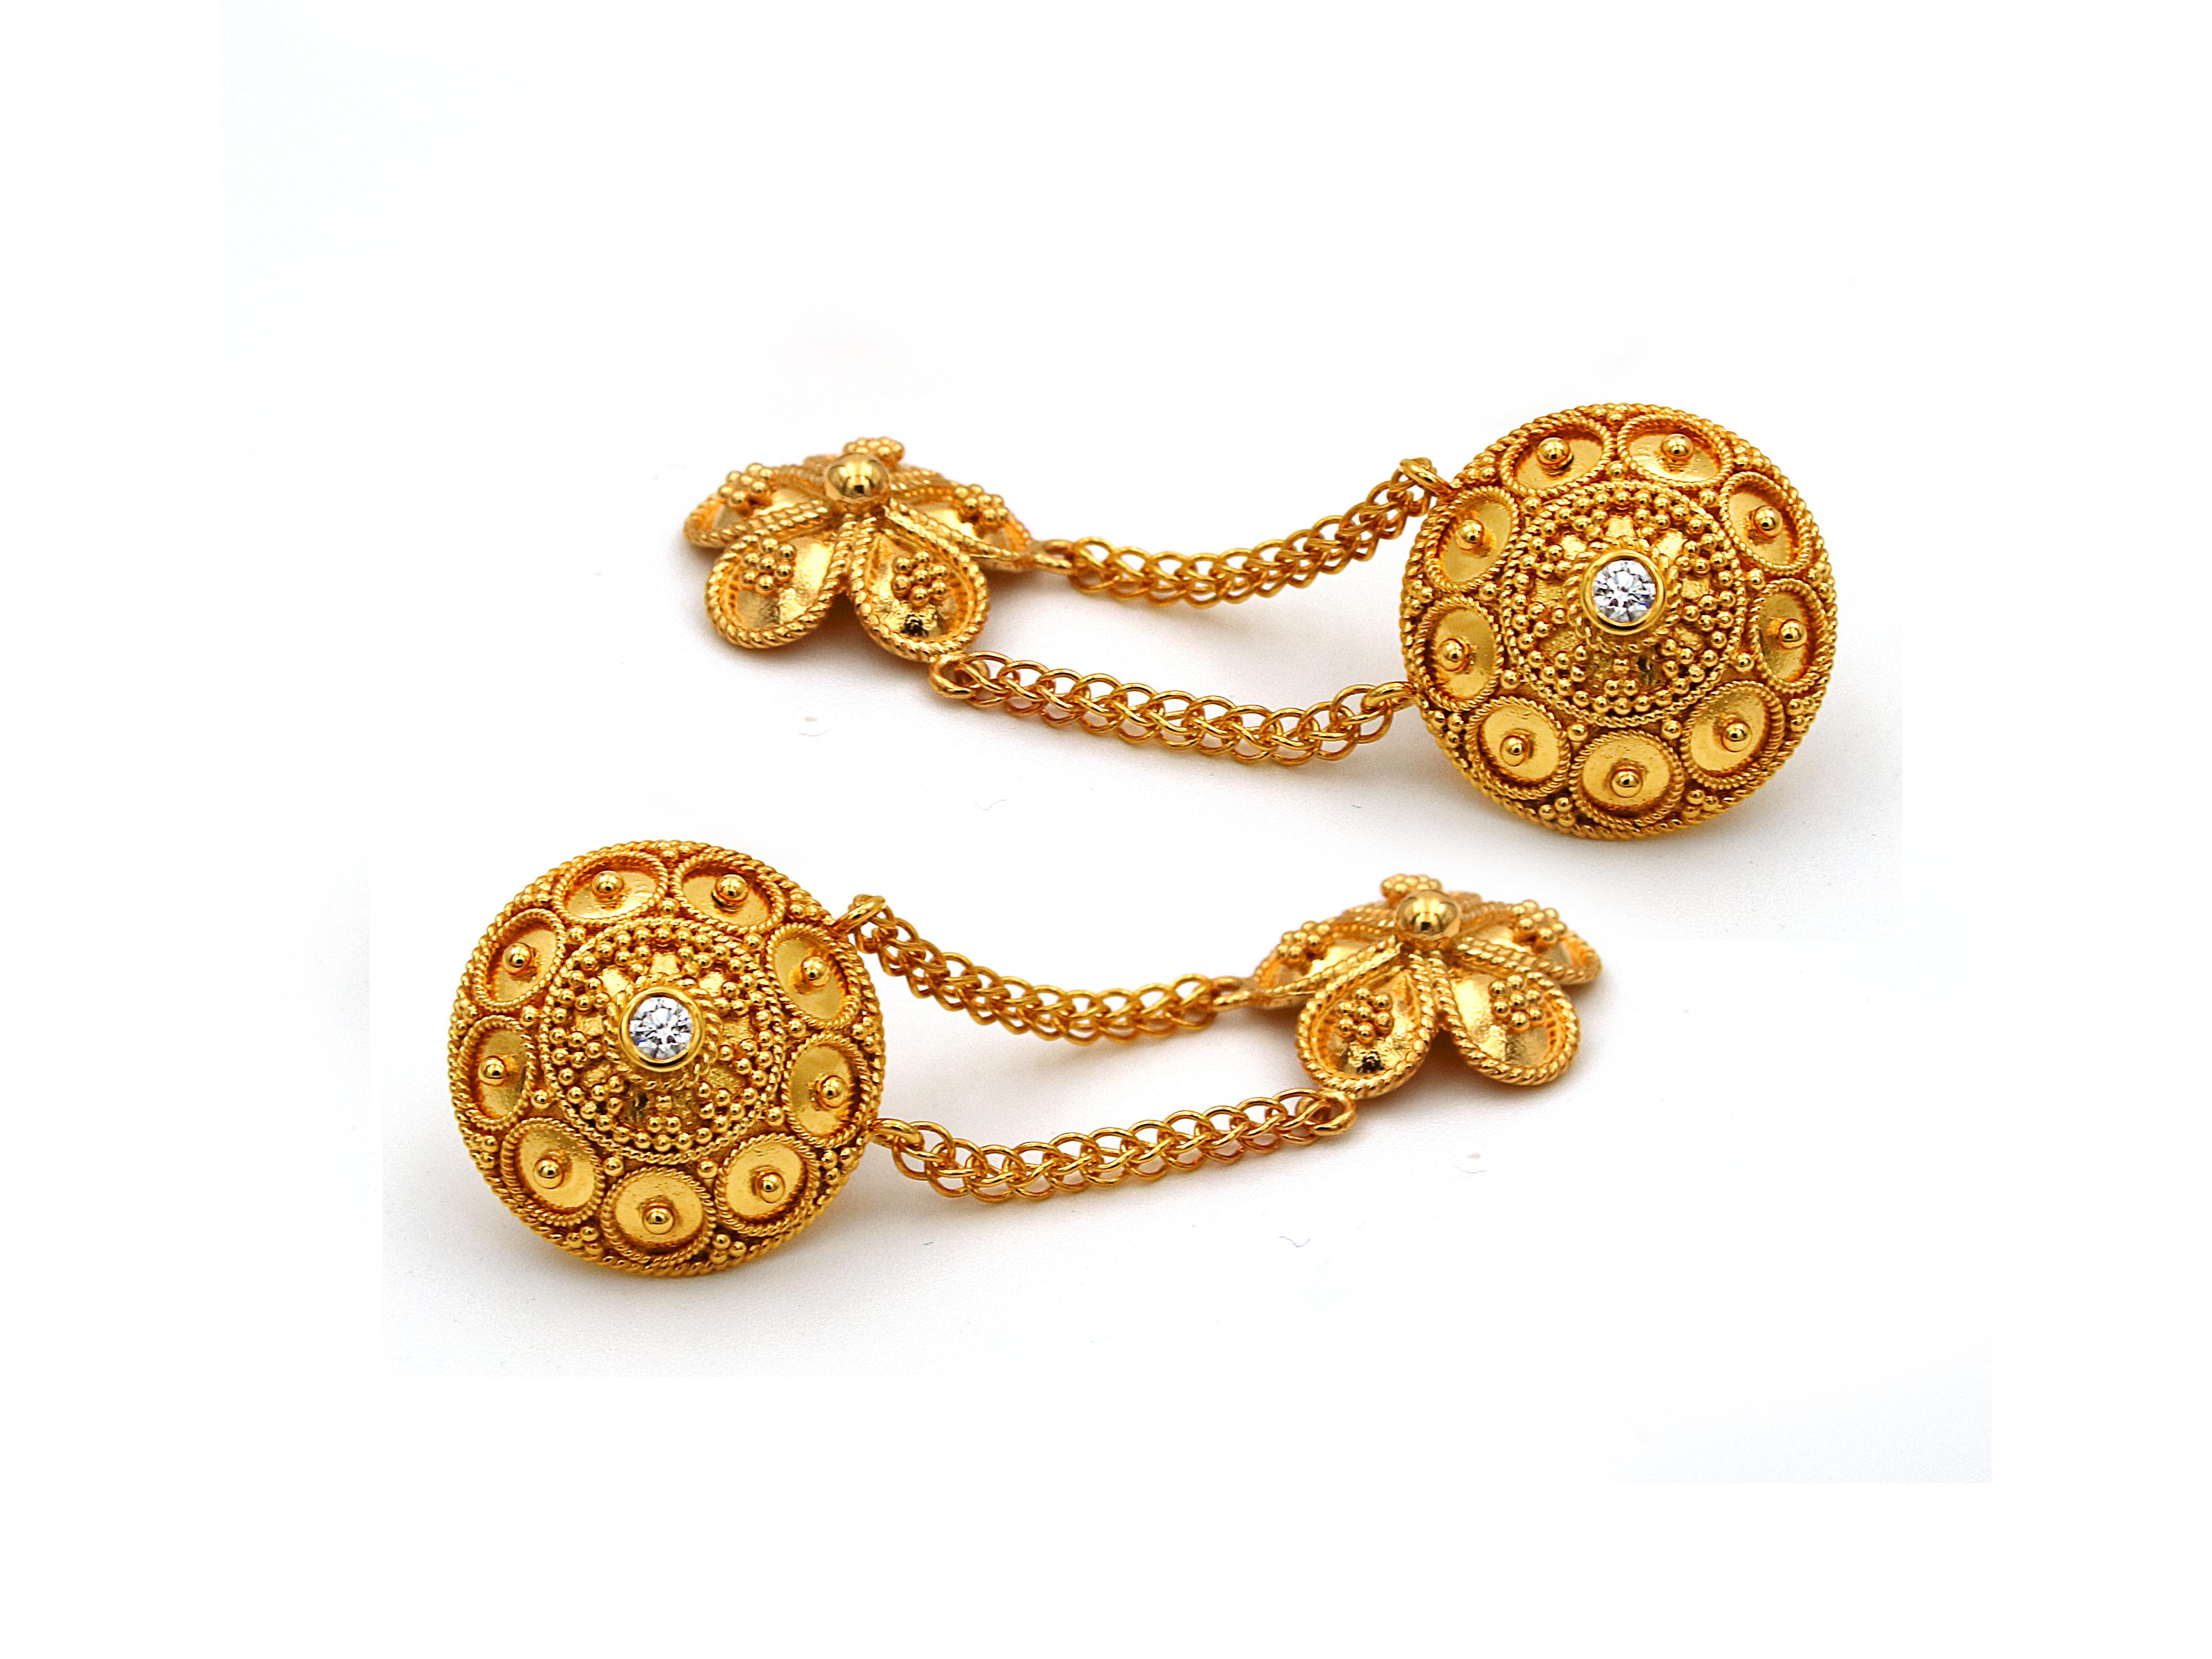 Neoclassic earrings completely handmade straight into 18 karats gold decorated with filigree circles and granulation. The Daisy on the bottom it’s a museum replica and dangles from handmade chains  that gives it’s life and motion. The center